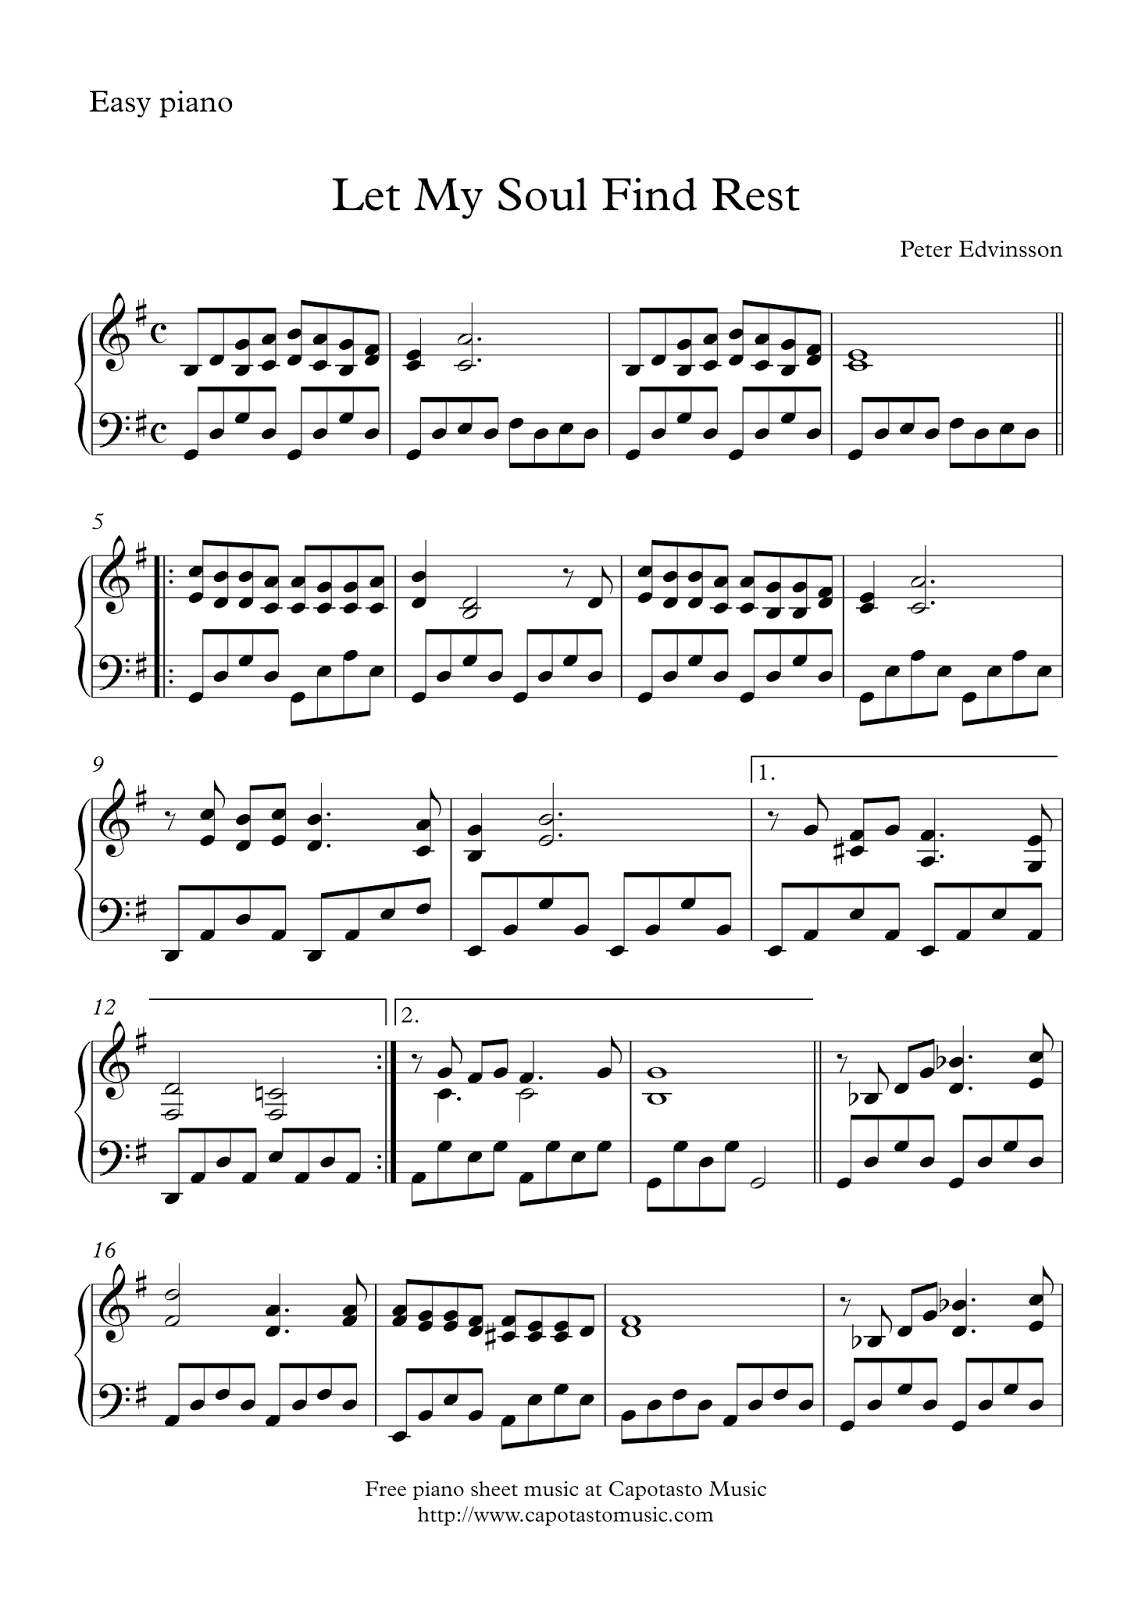 Free Printable Sheet Music Pdf Scores With Popular Songs Free Easy Piano Sheet Music Let My Soul Find Rest By Peter Edvinsson